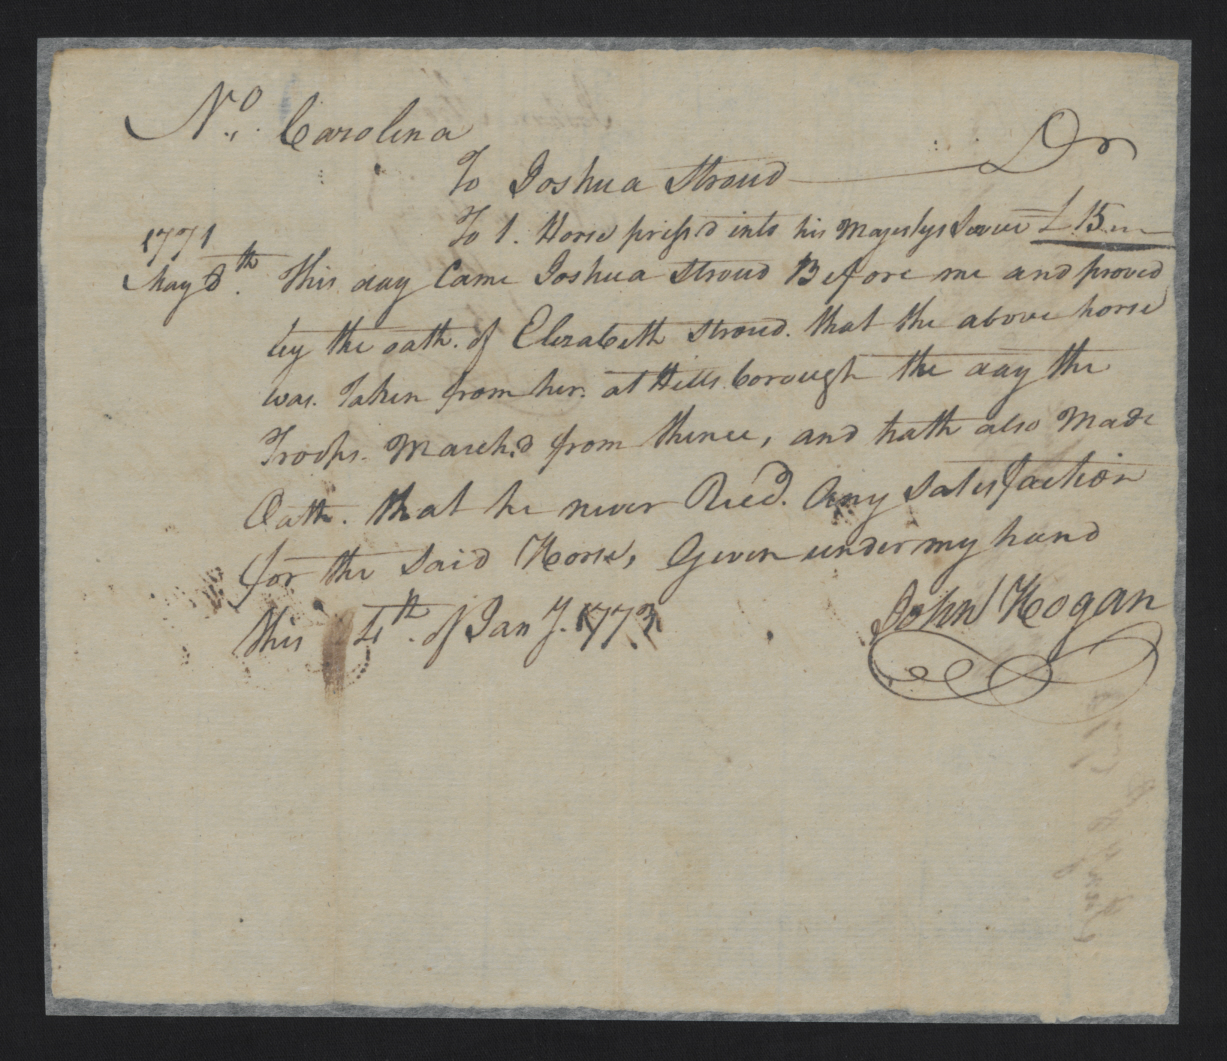 Claim from Joshua Stroud on Behalf of Elizabeth Stroud for the Impressment of a Horse, 4 January 1773, page 1.